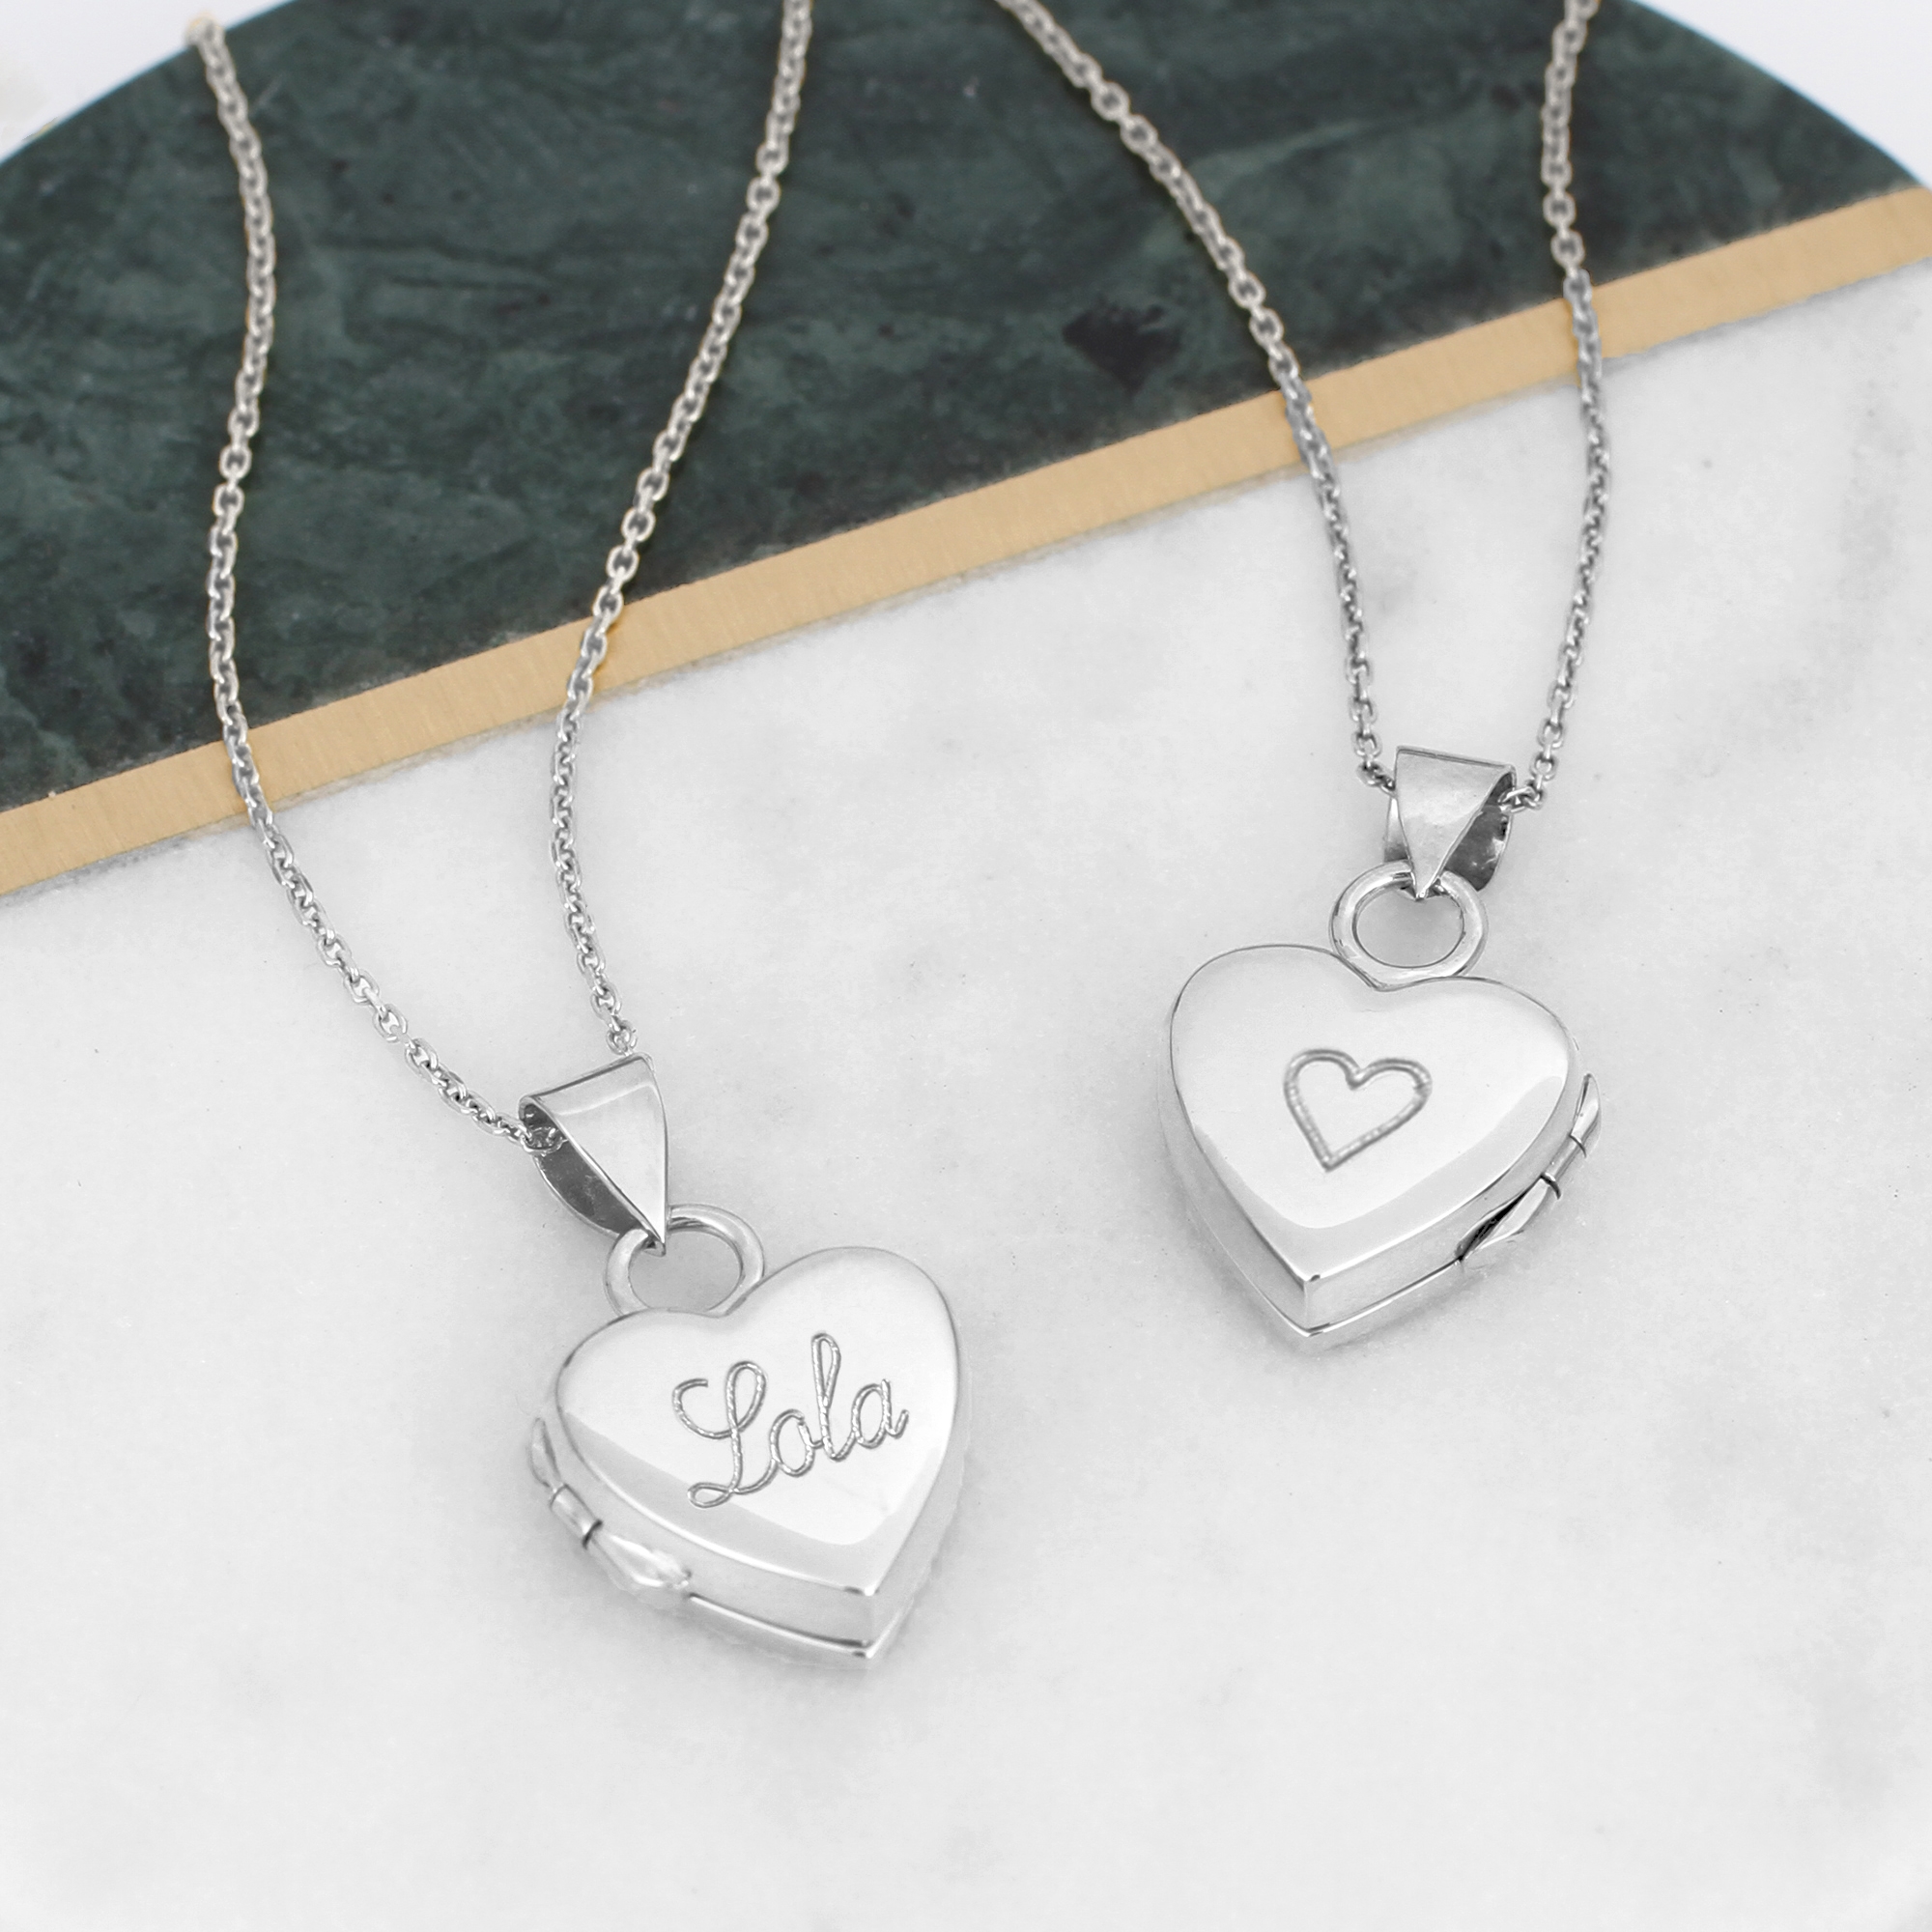 Personalised Sterling Silver Heart Locket Necklace – Hurley Burley